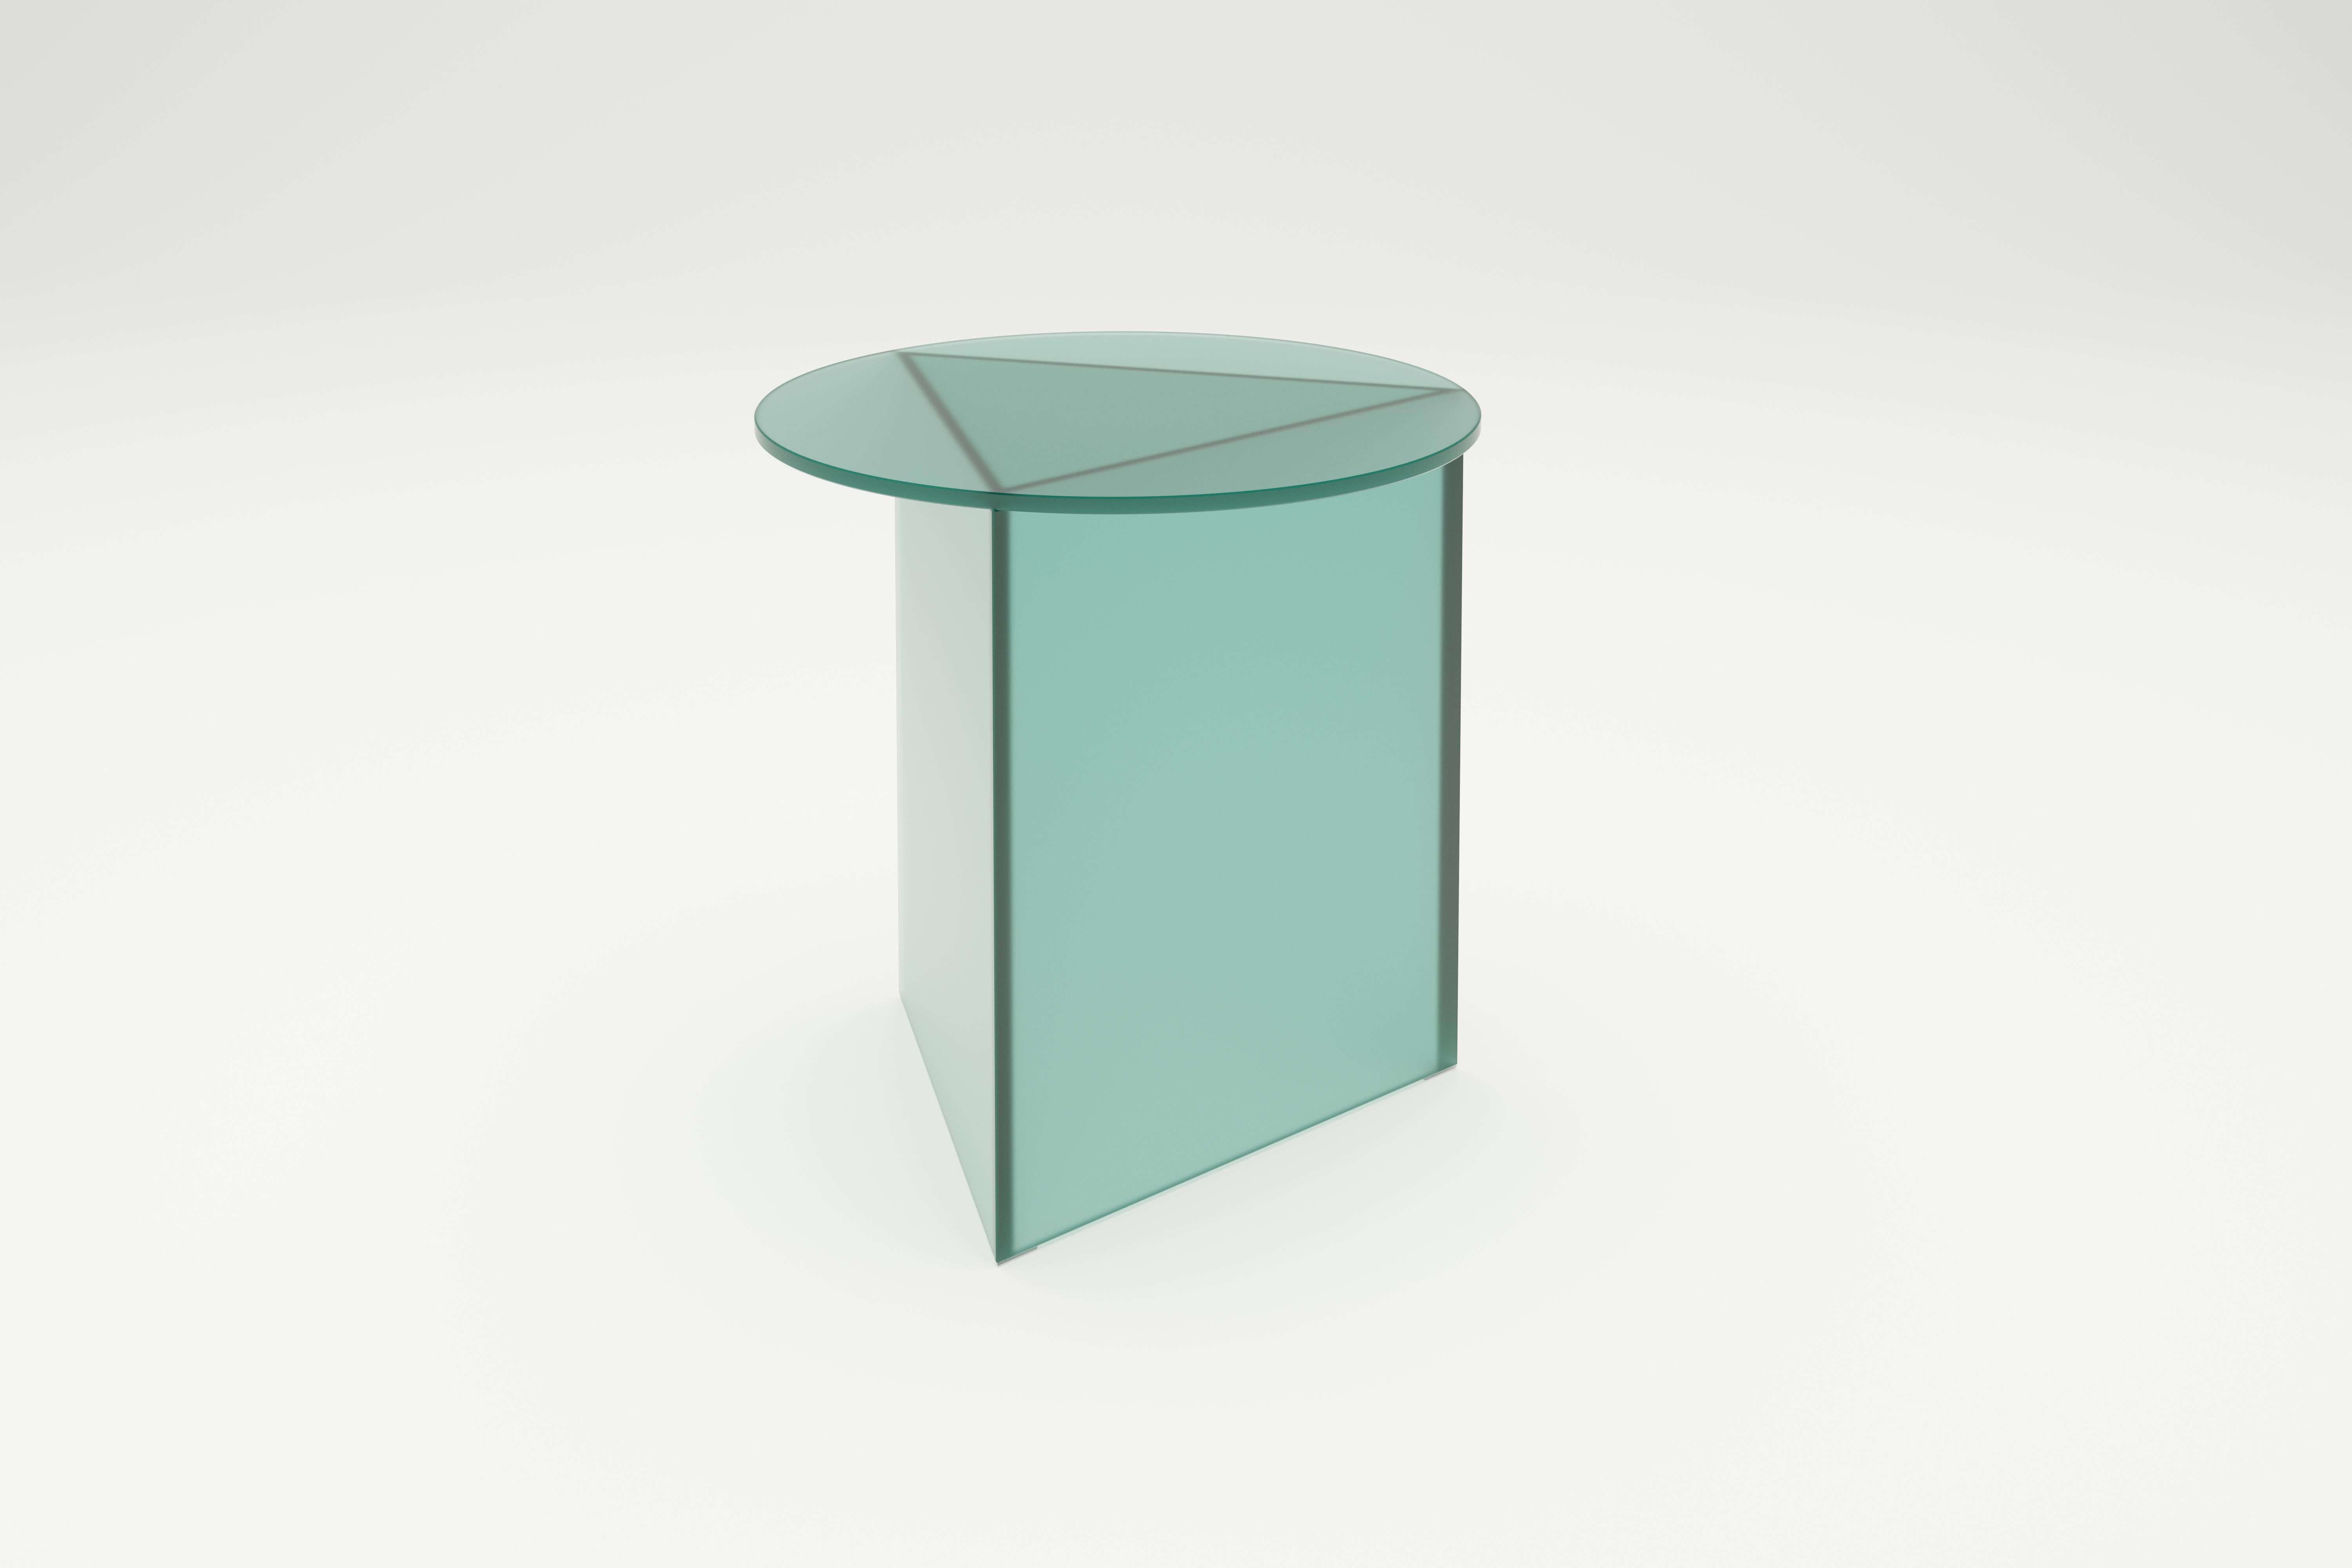 Satin glass Prisma tall 50 coffe table by Sebastian Scherer
Dimensions: D 50x H 50 cm
Materials: Solid coloured glass.
Weight: 20.5 kg.
Also available: Glass: clear white / clear green / clear blue / clear bronze / clear black / satin white /